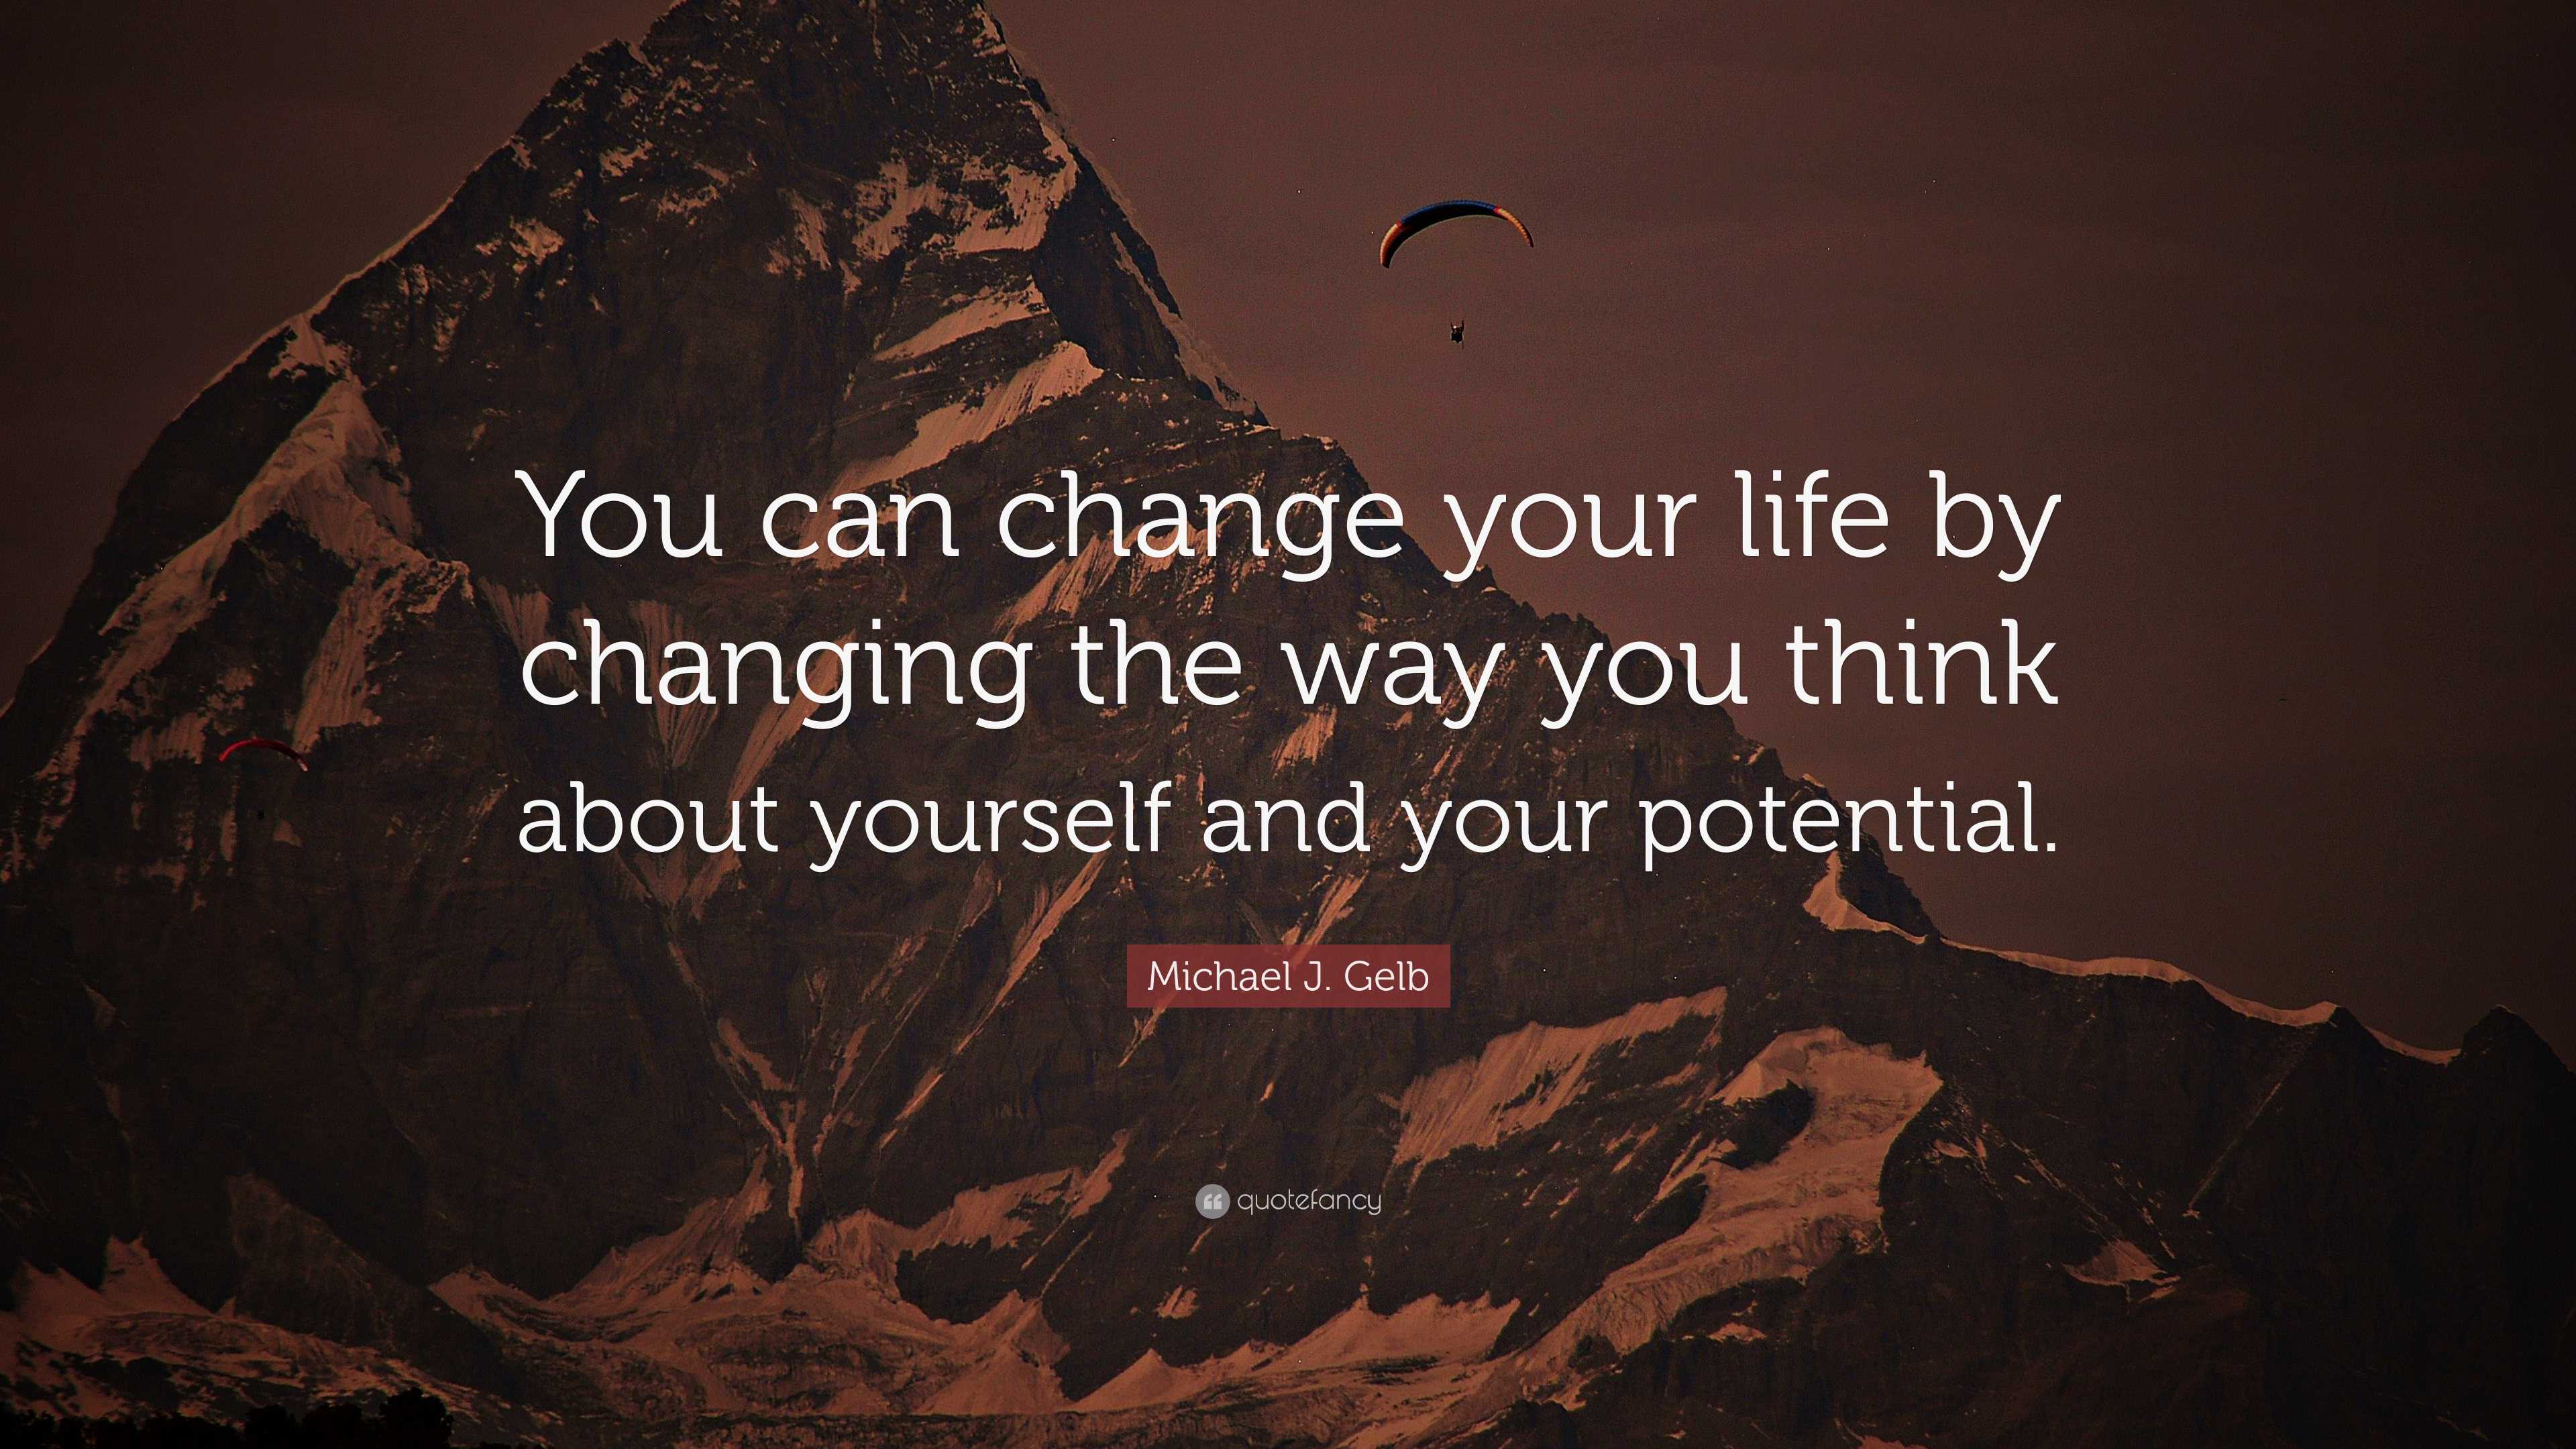 Michael J. Gelb Quote: “You can change your life by changing the way ...